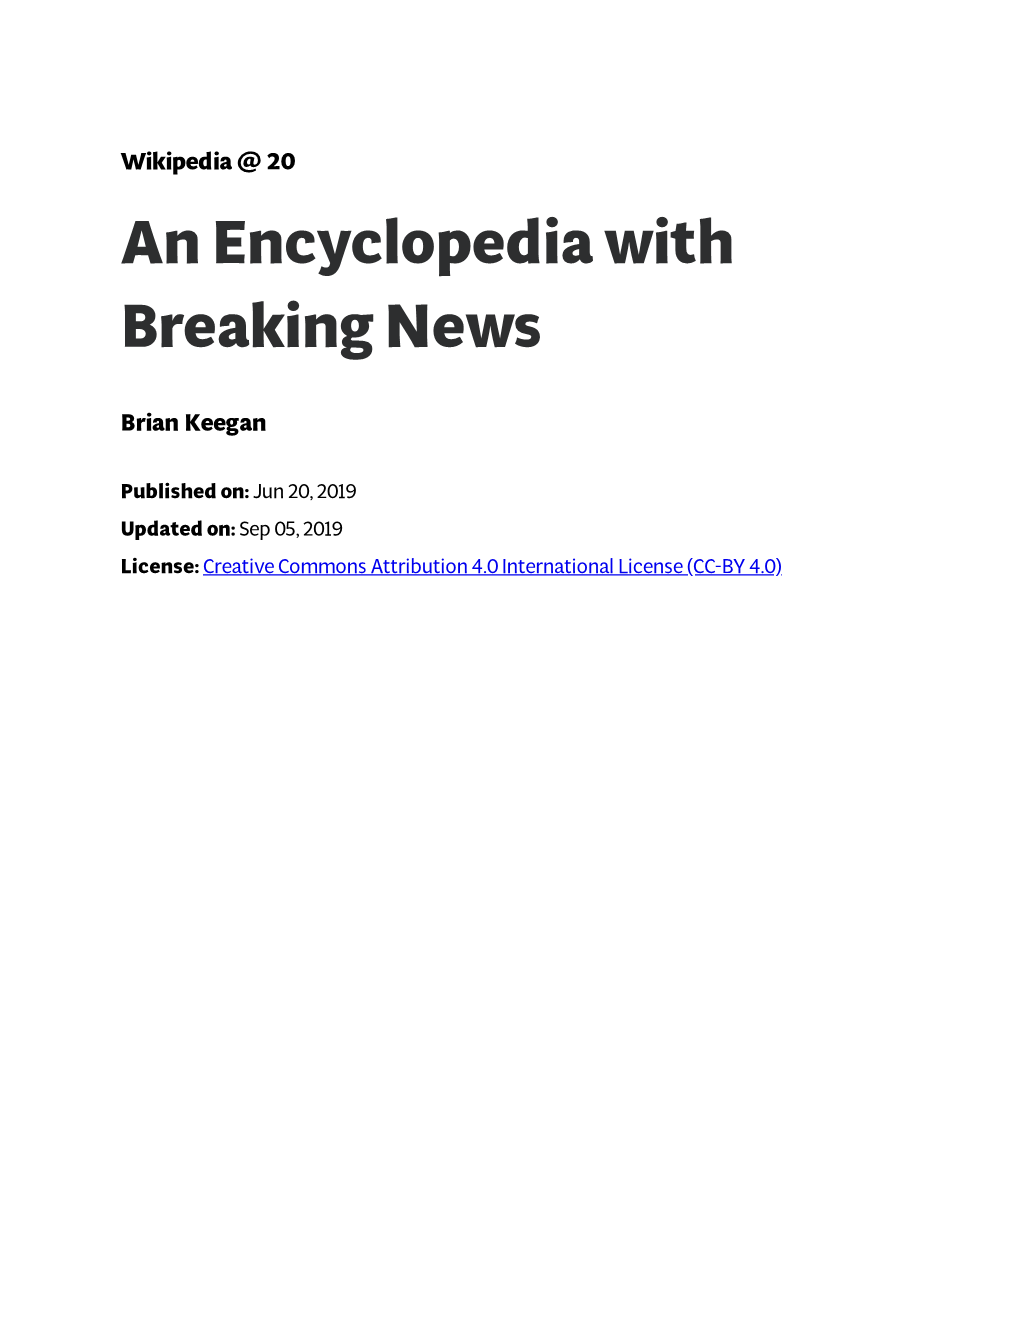 An Encyclopedia with Breaking News